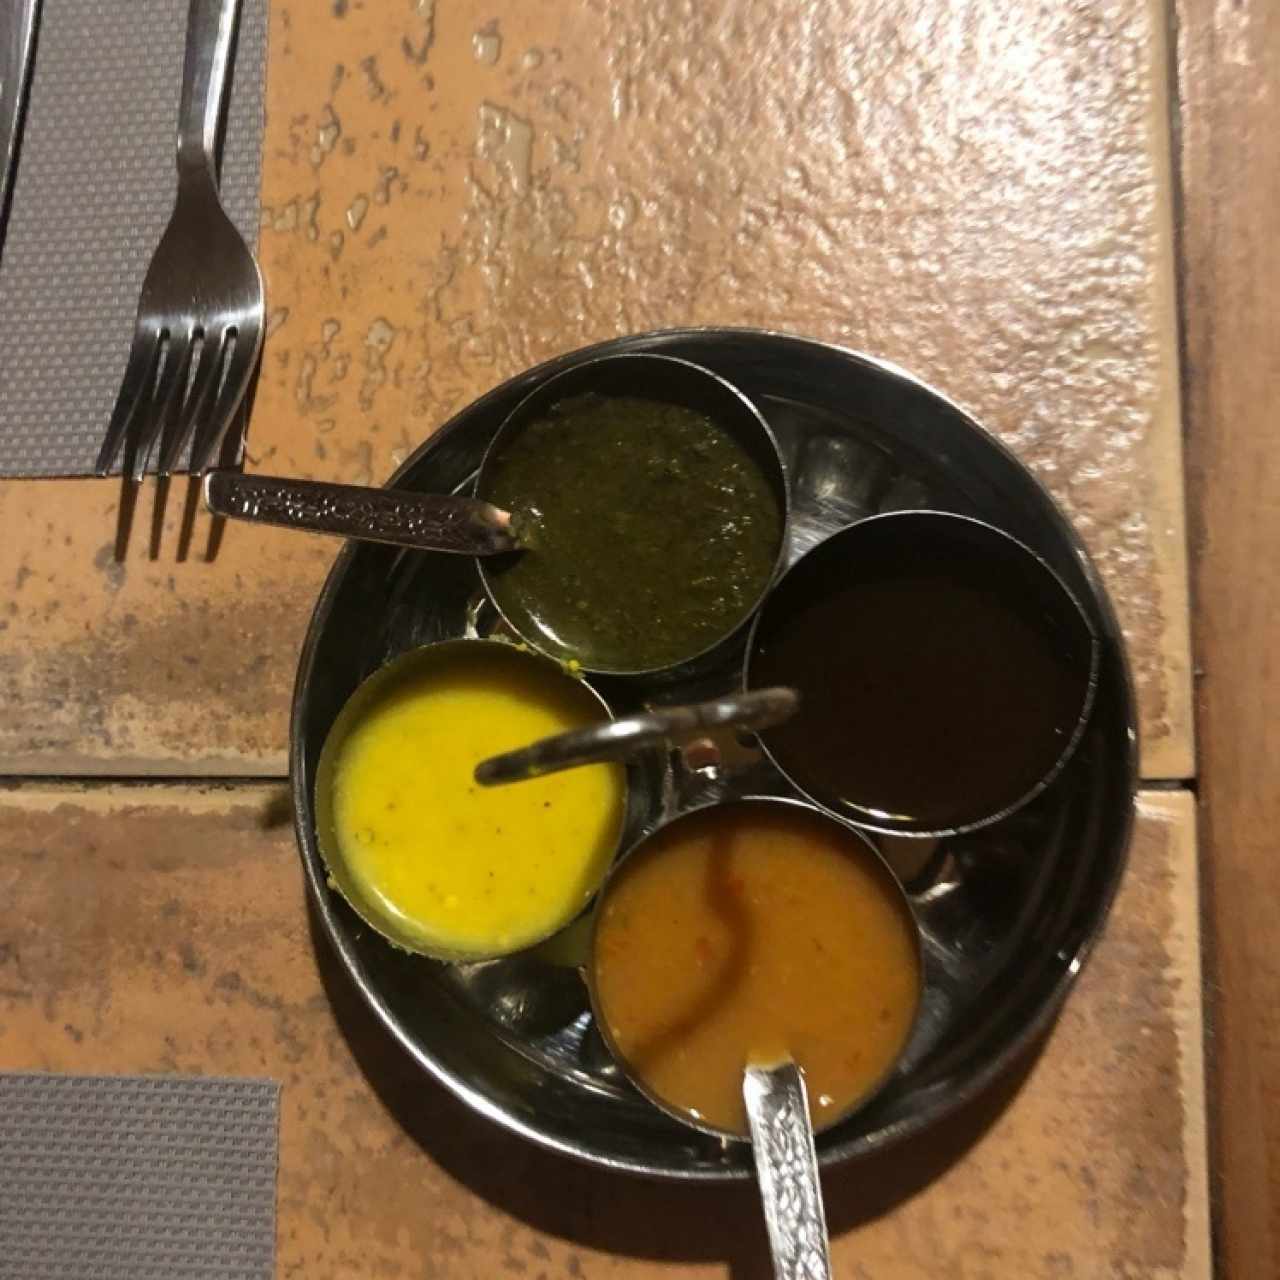 table sauces...nice touch